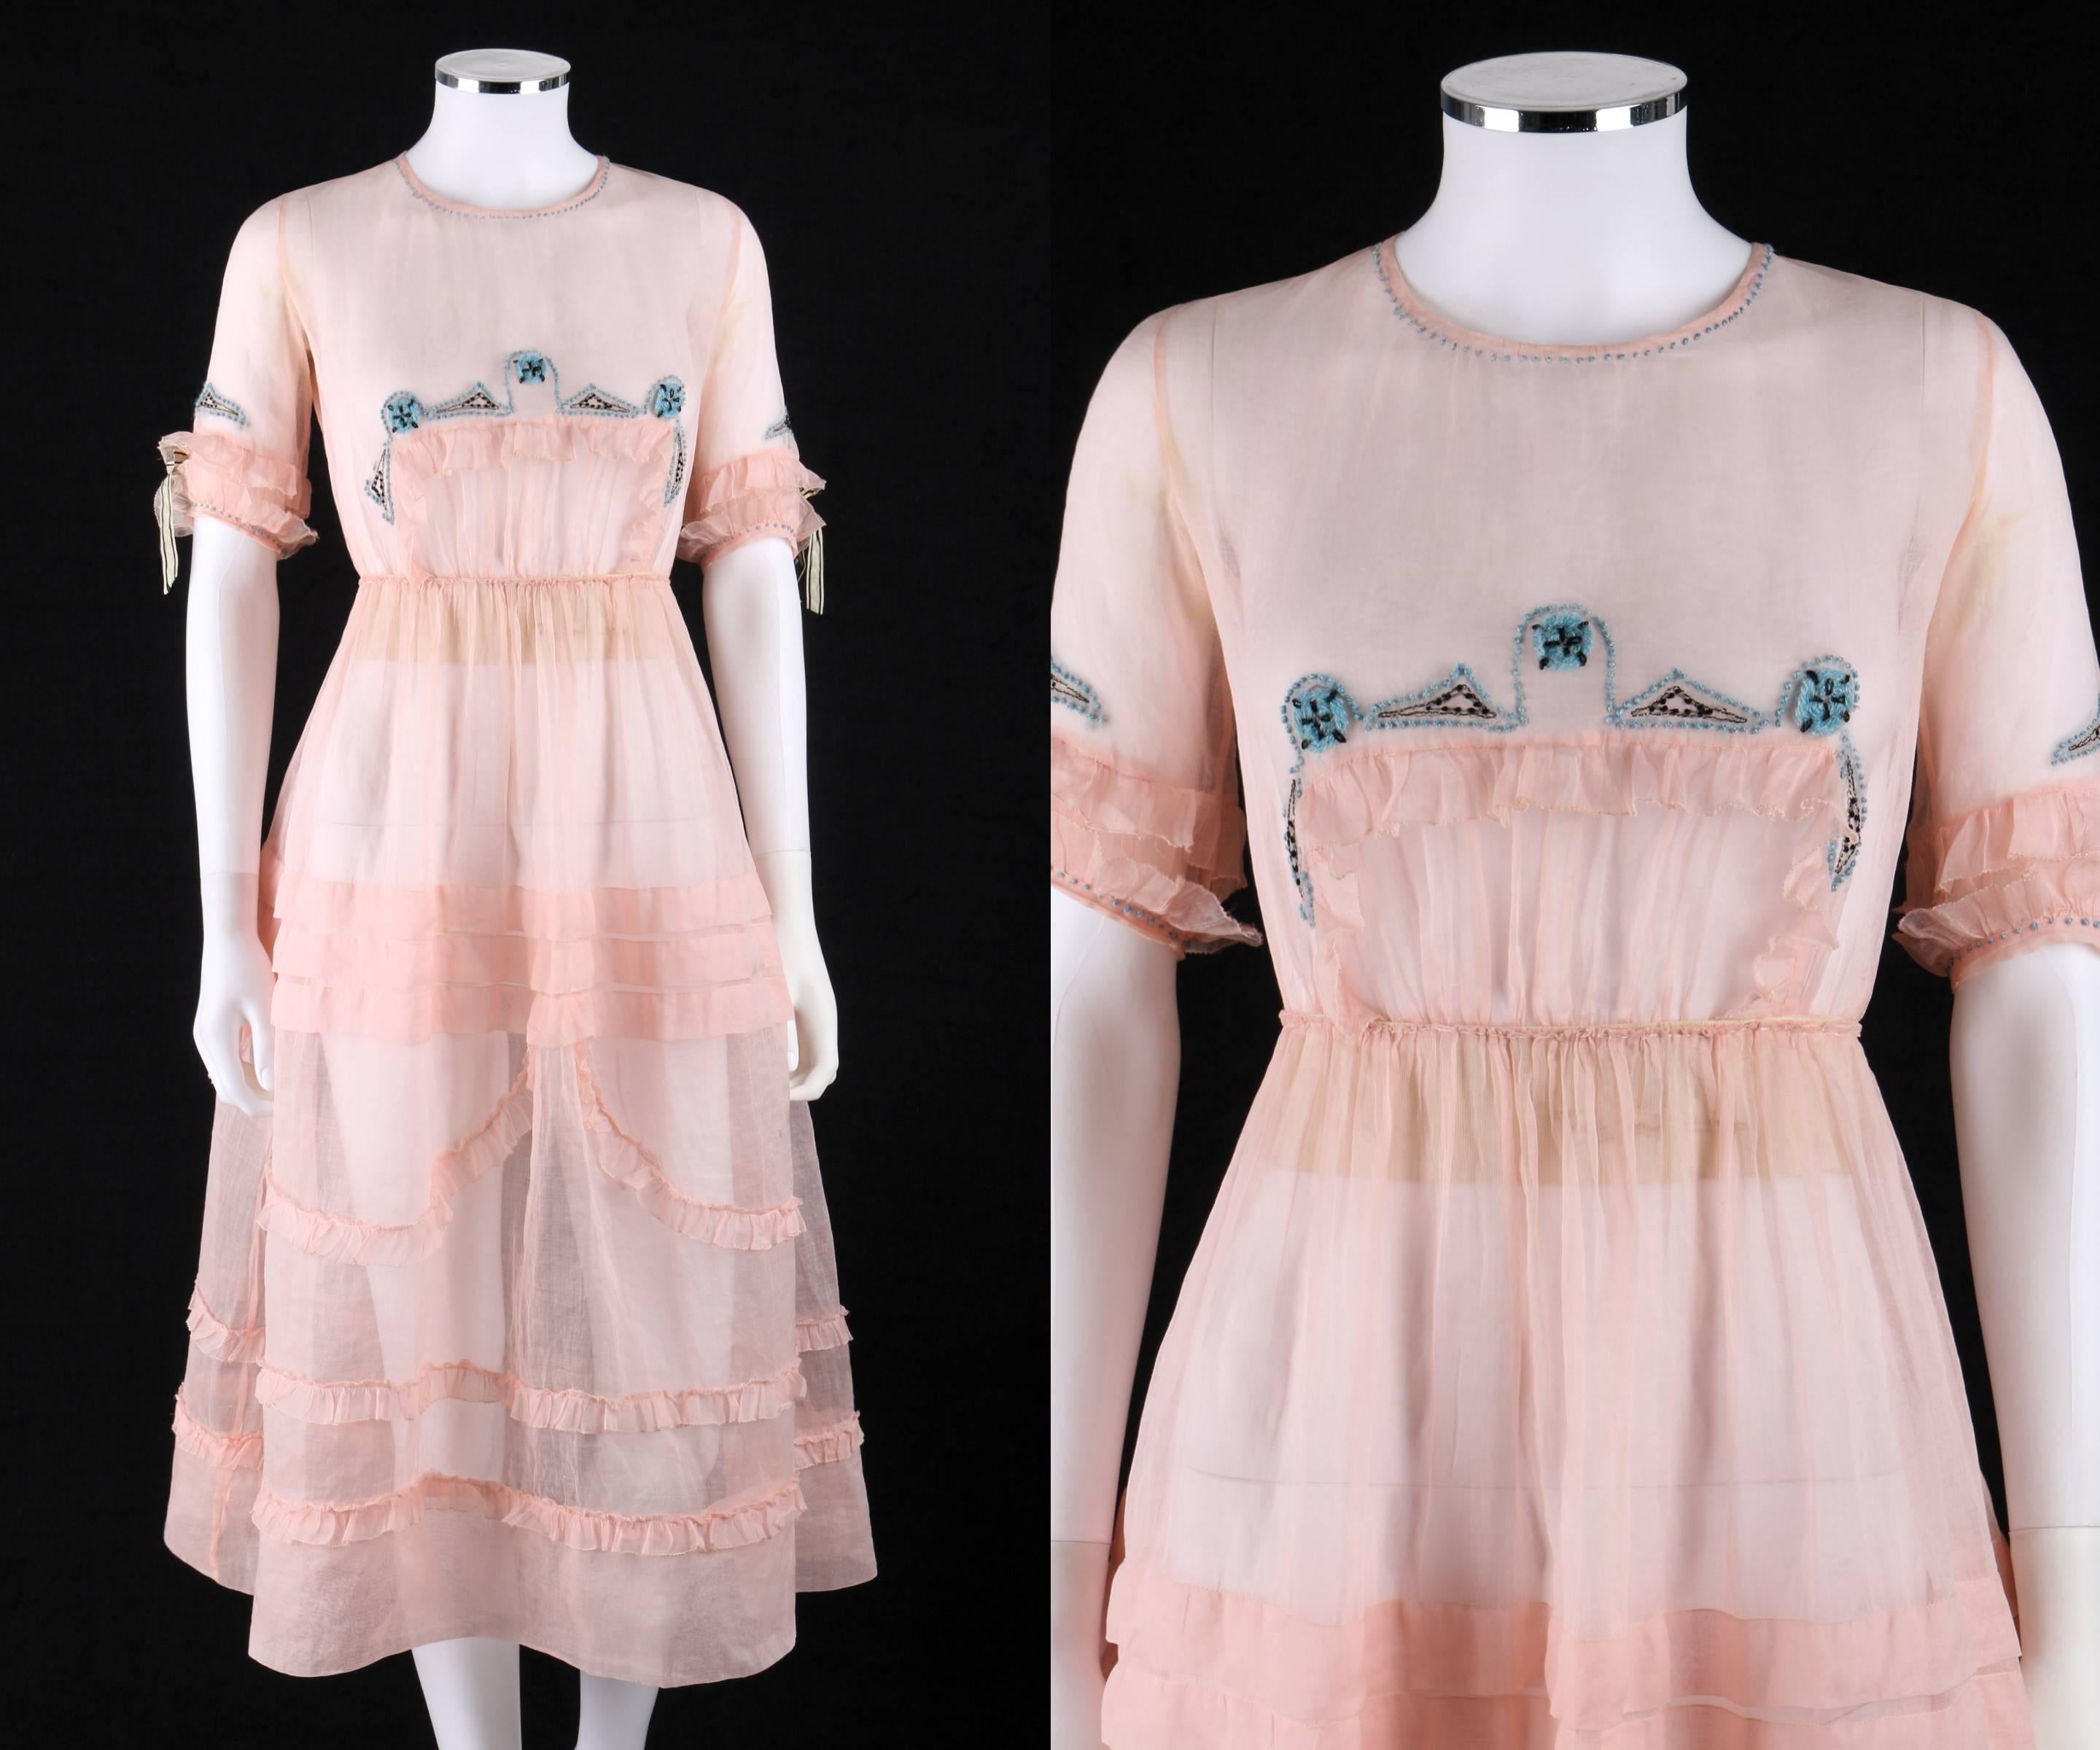 One of a Kind - Late 1910's Couture pink silk organza sheer day dress. Blue and black geometric yarn embroidered detail at collar, cuffs, and center front. Jewel neckline. Elbow length sleeves with tiered ruffles and silk bow detail at cuffs.